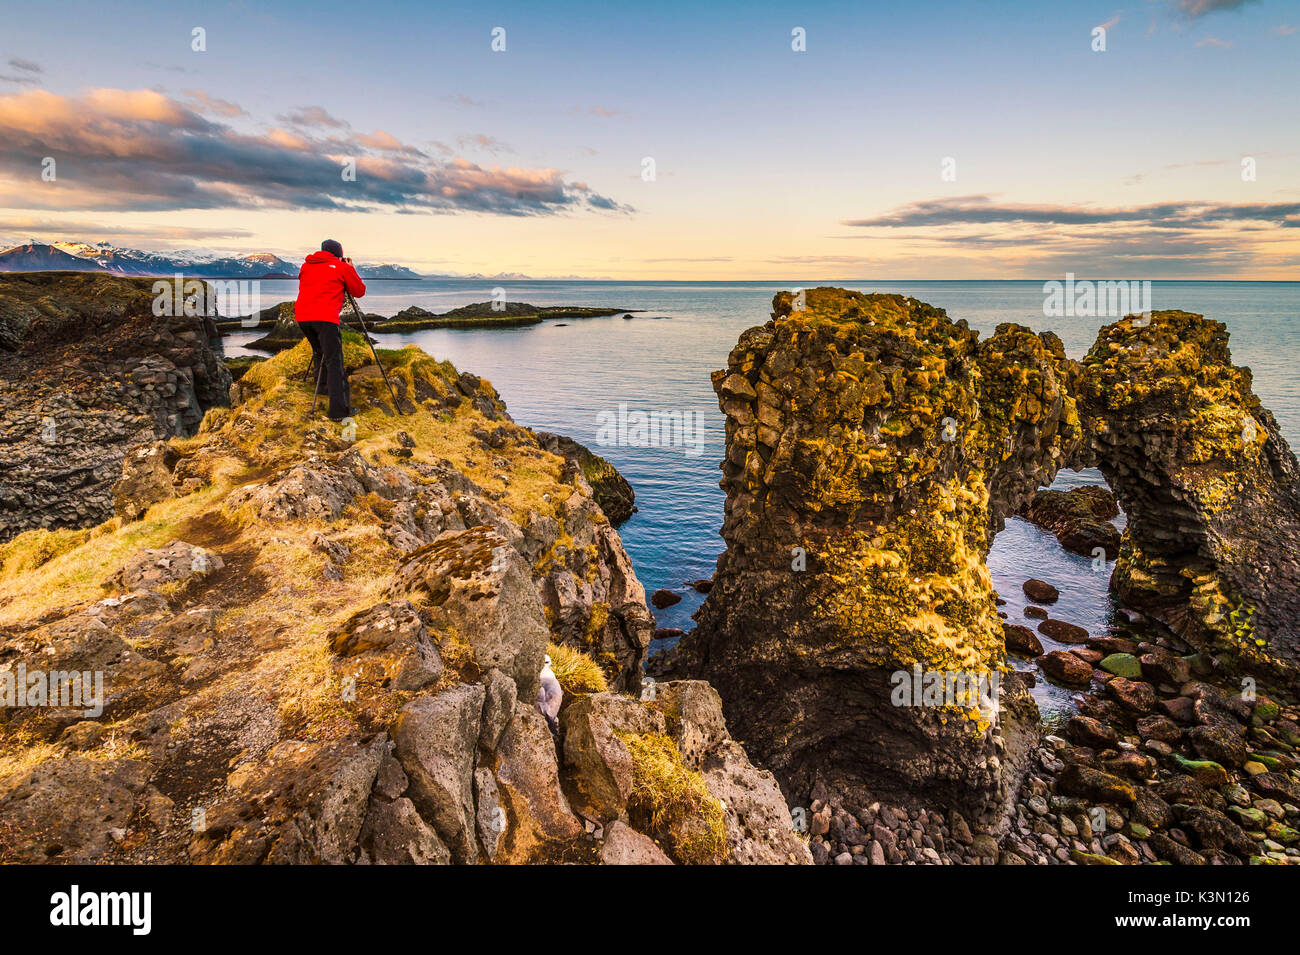 Snaefellsness peninsula, Iceland. Man standing over a rock formation along the coast. Stock Photo